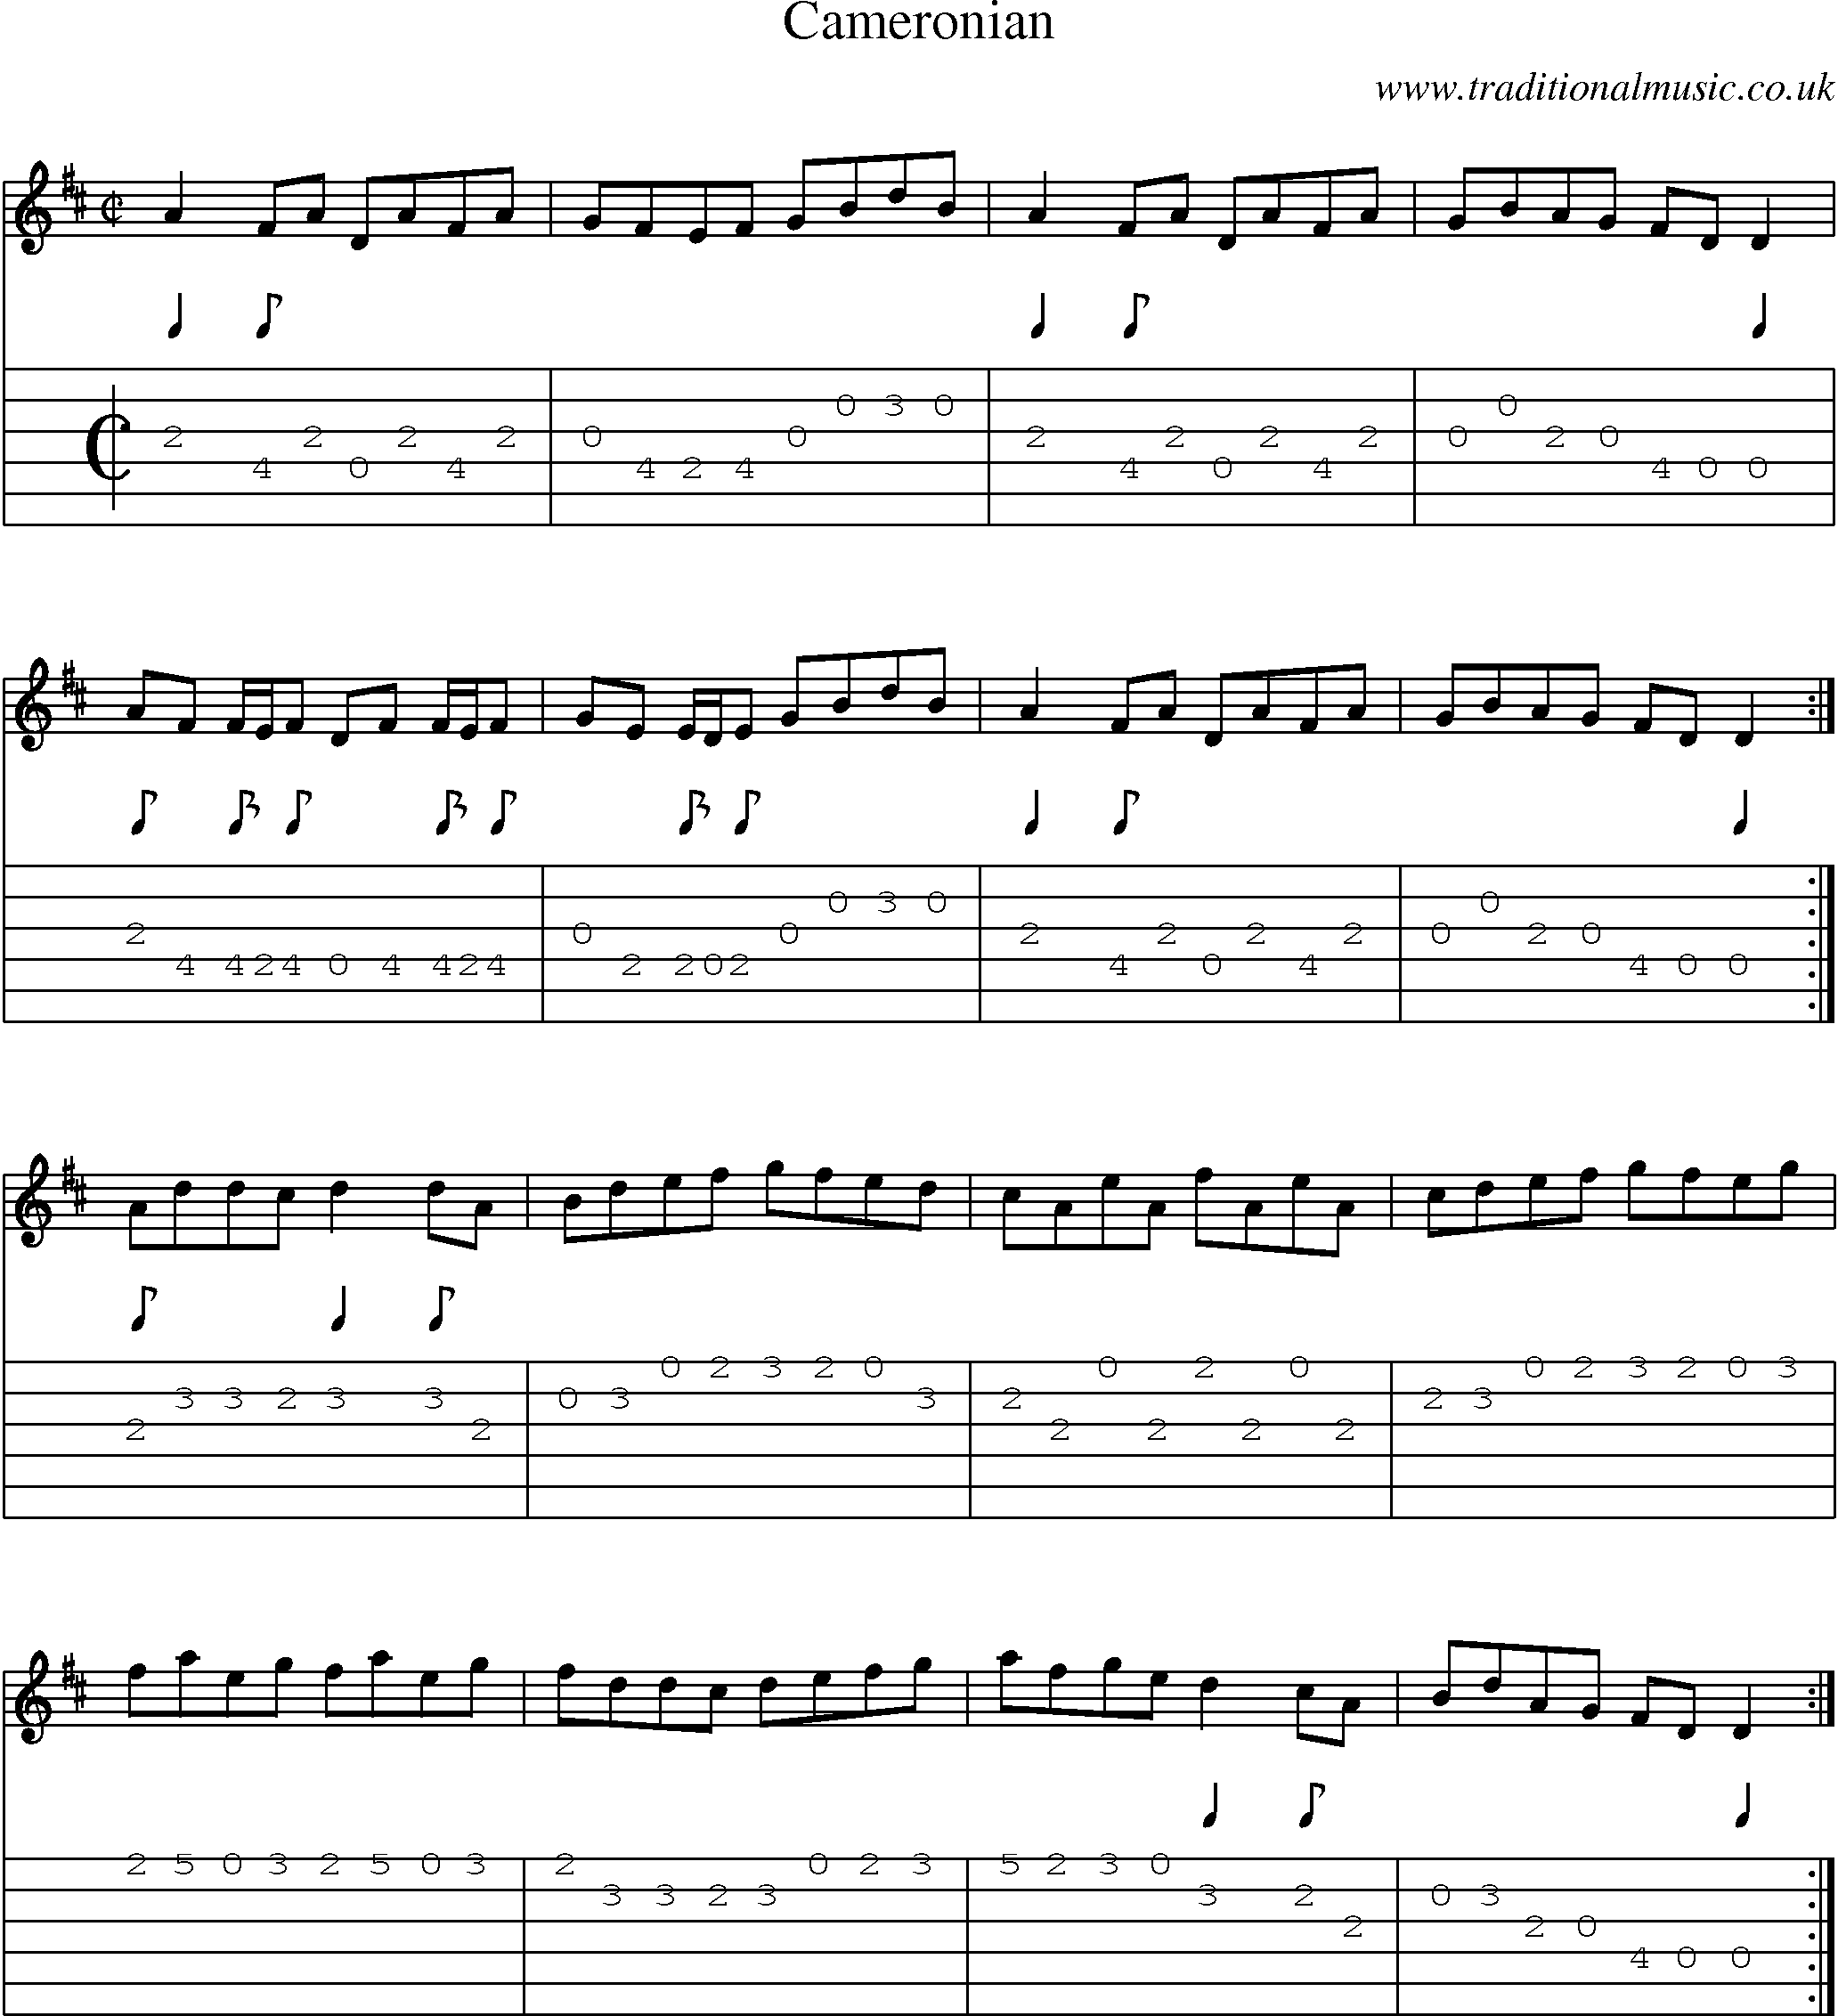 Music Score and Guitar Tabs for Cameronian